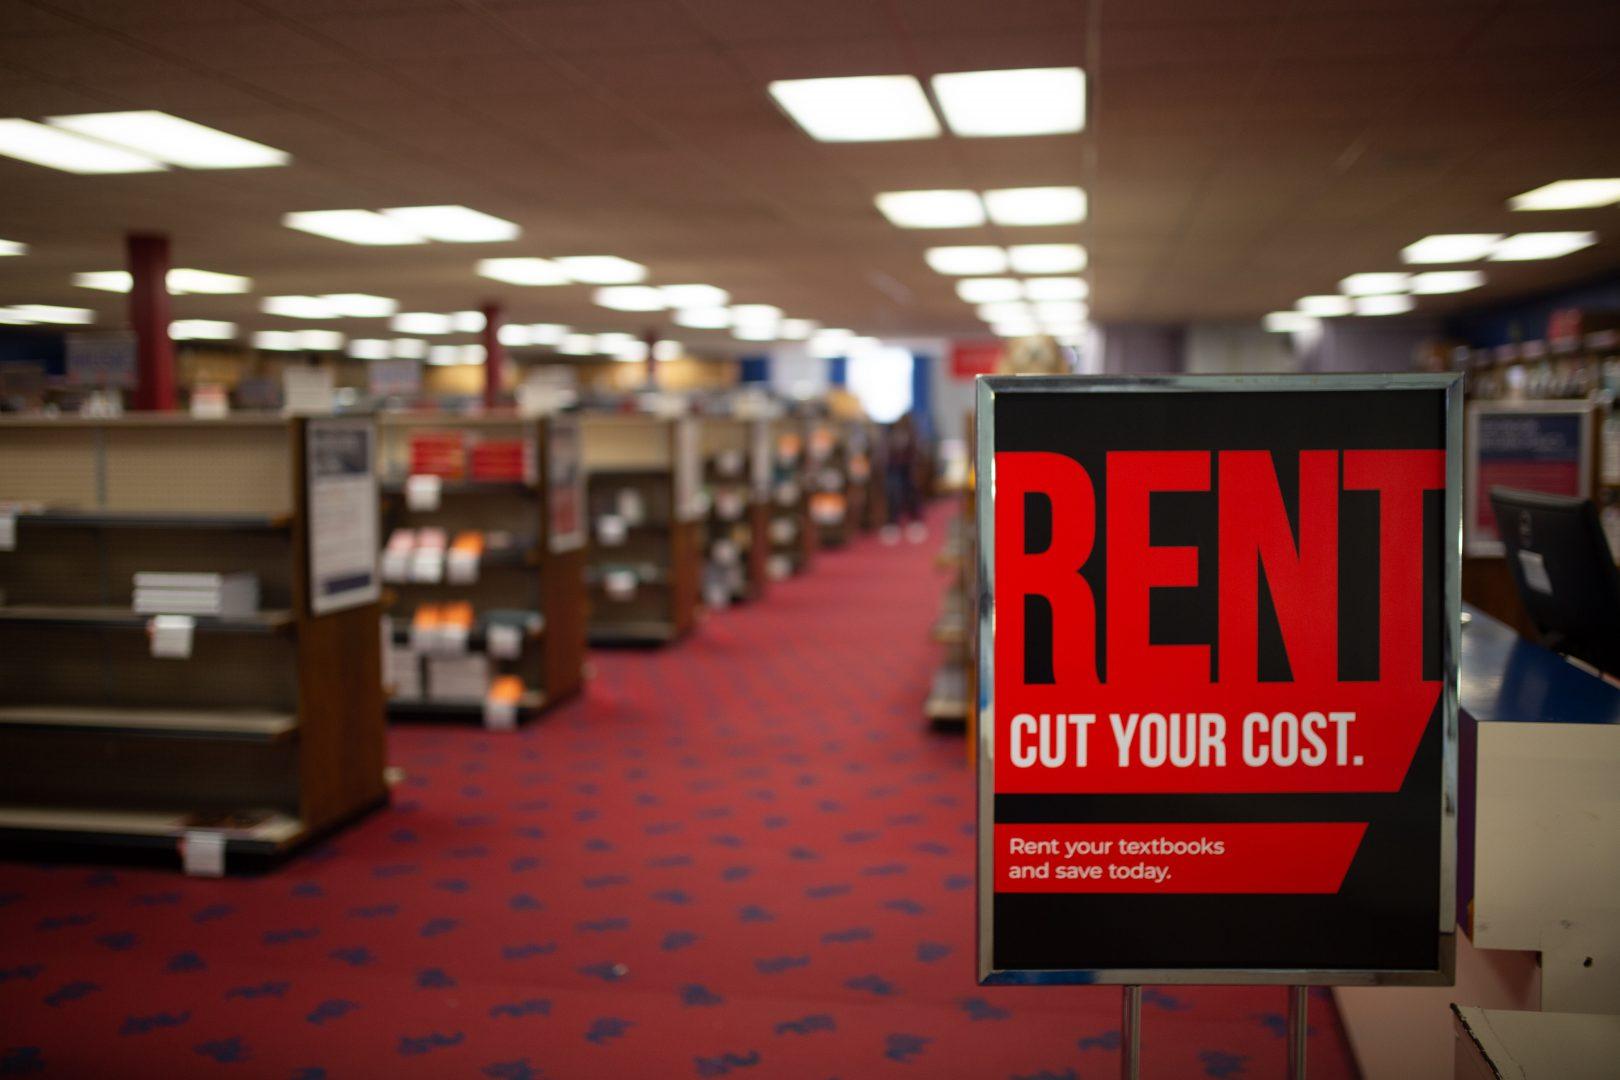 Rent+cut+your+cost+sign+at+the+Kennel+Bookstore+at+California+State+University%2C+Fresno+%28Armando+Carreno%2FThe+Collegian%29